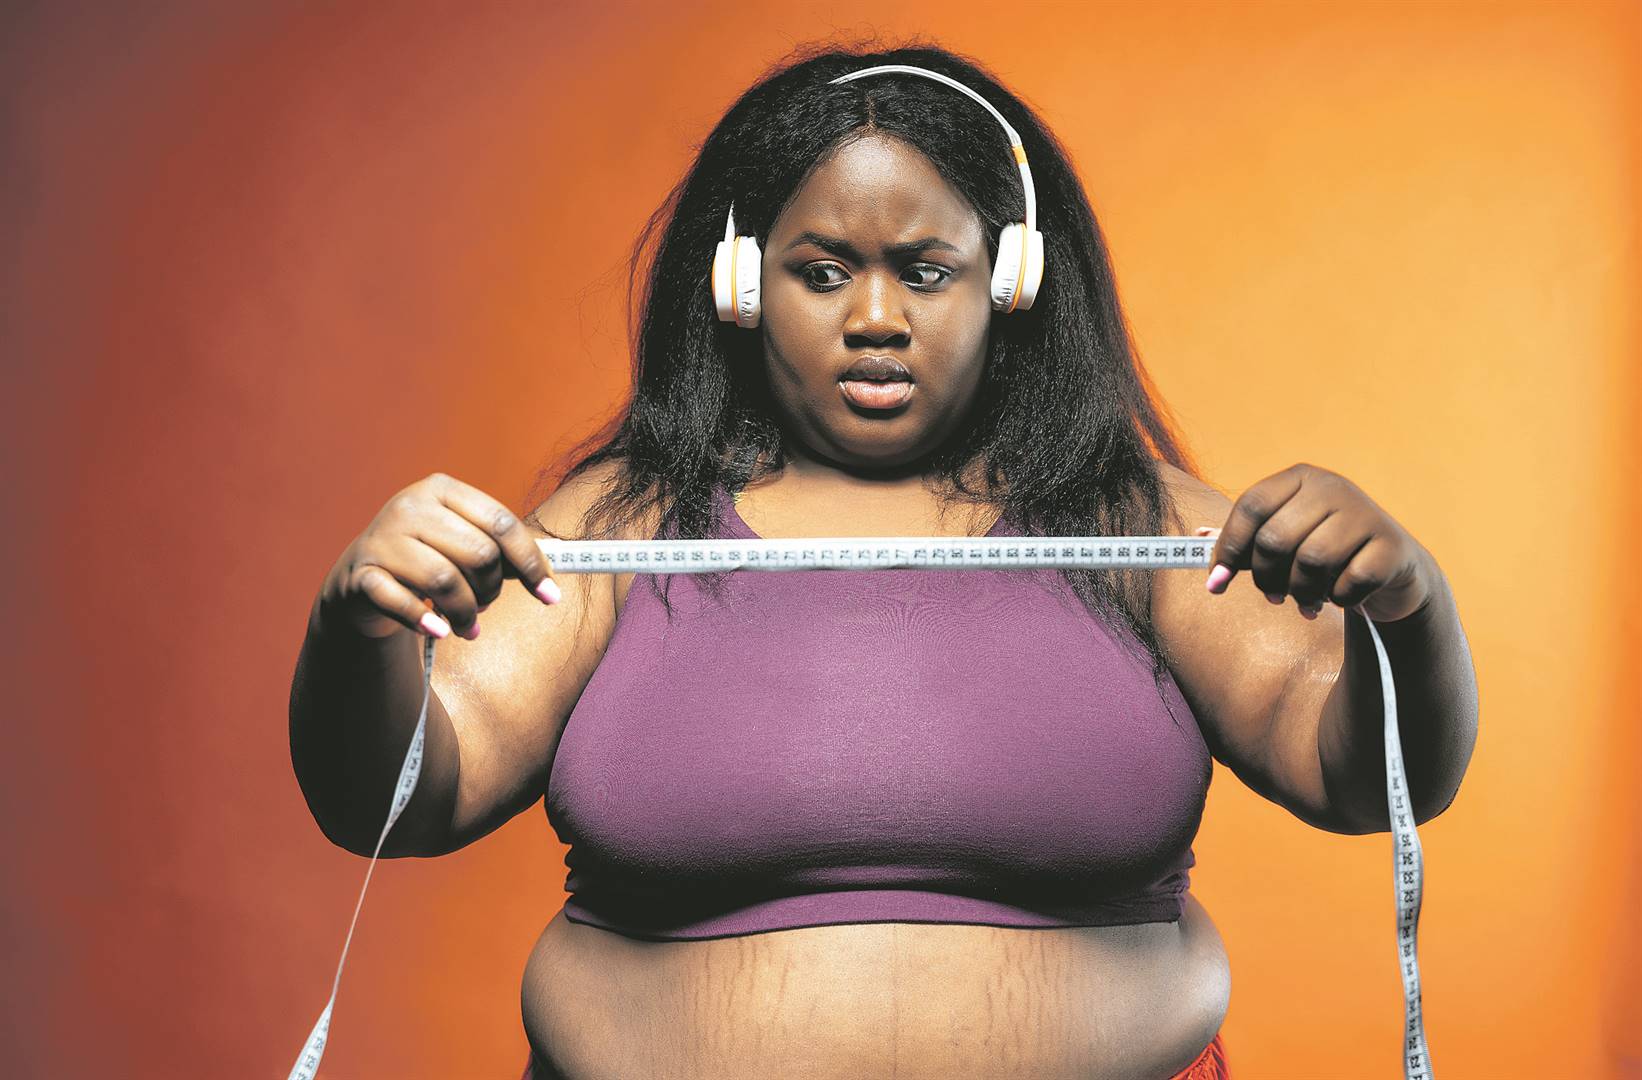 According to researchers, obesity has increased significantly around the world